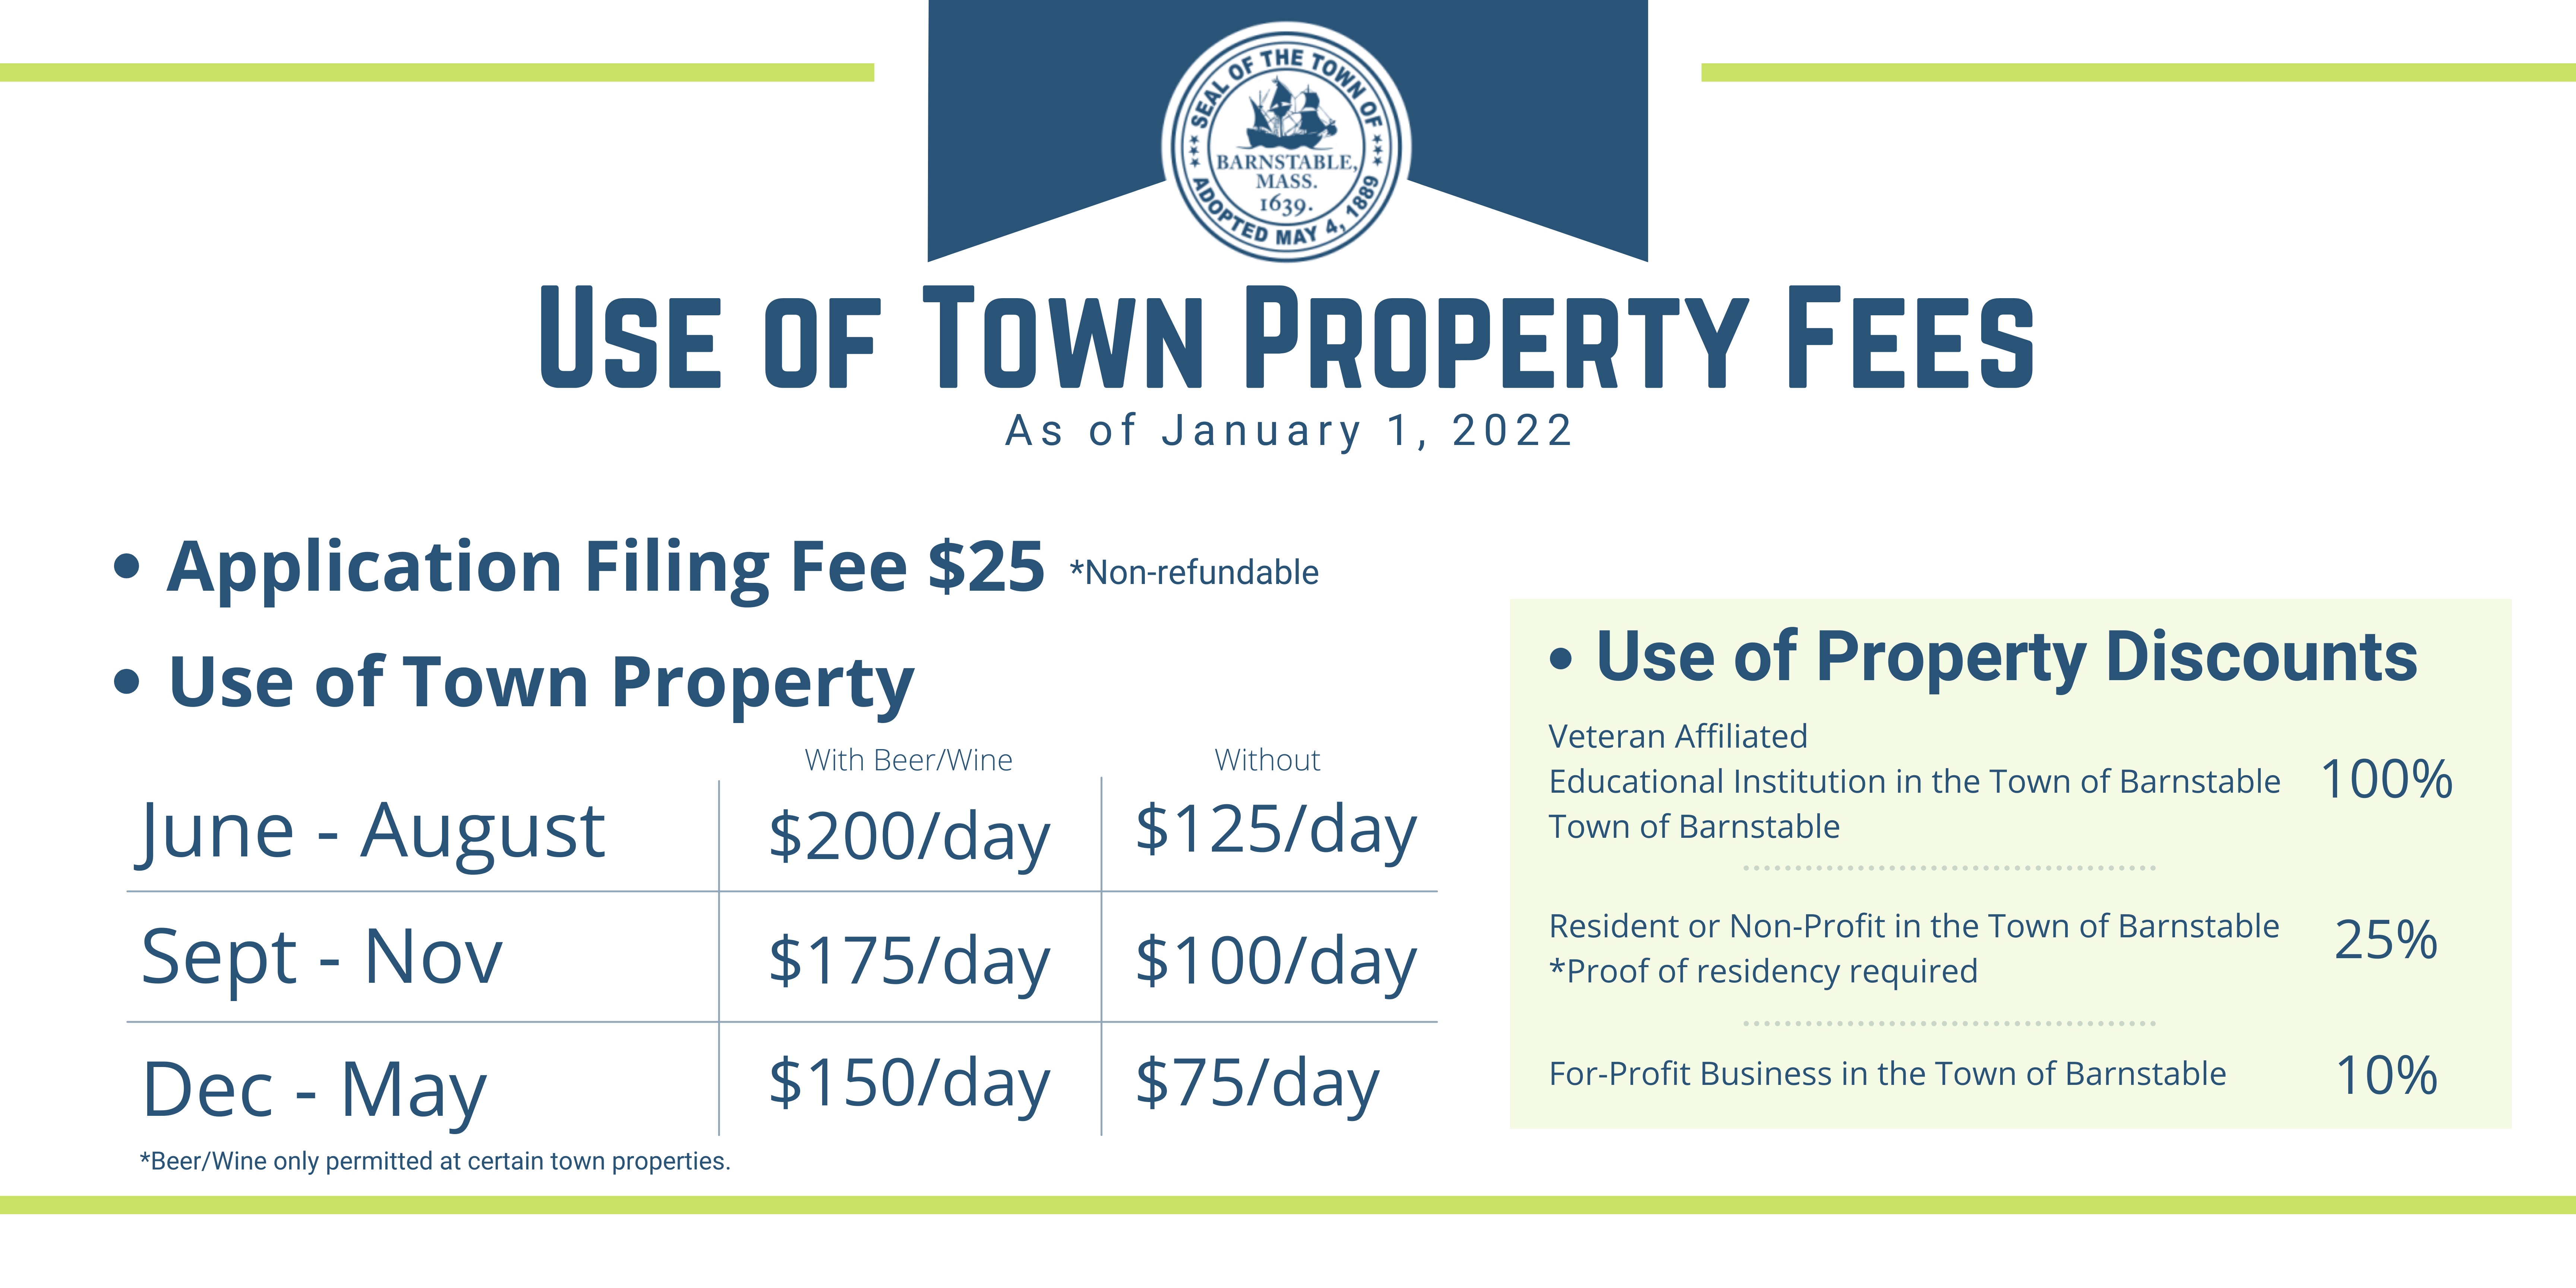 Use of Property